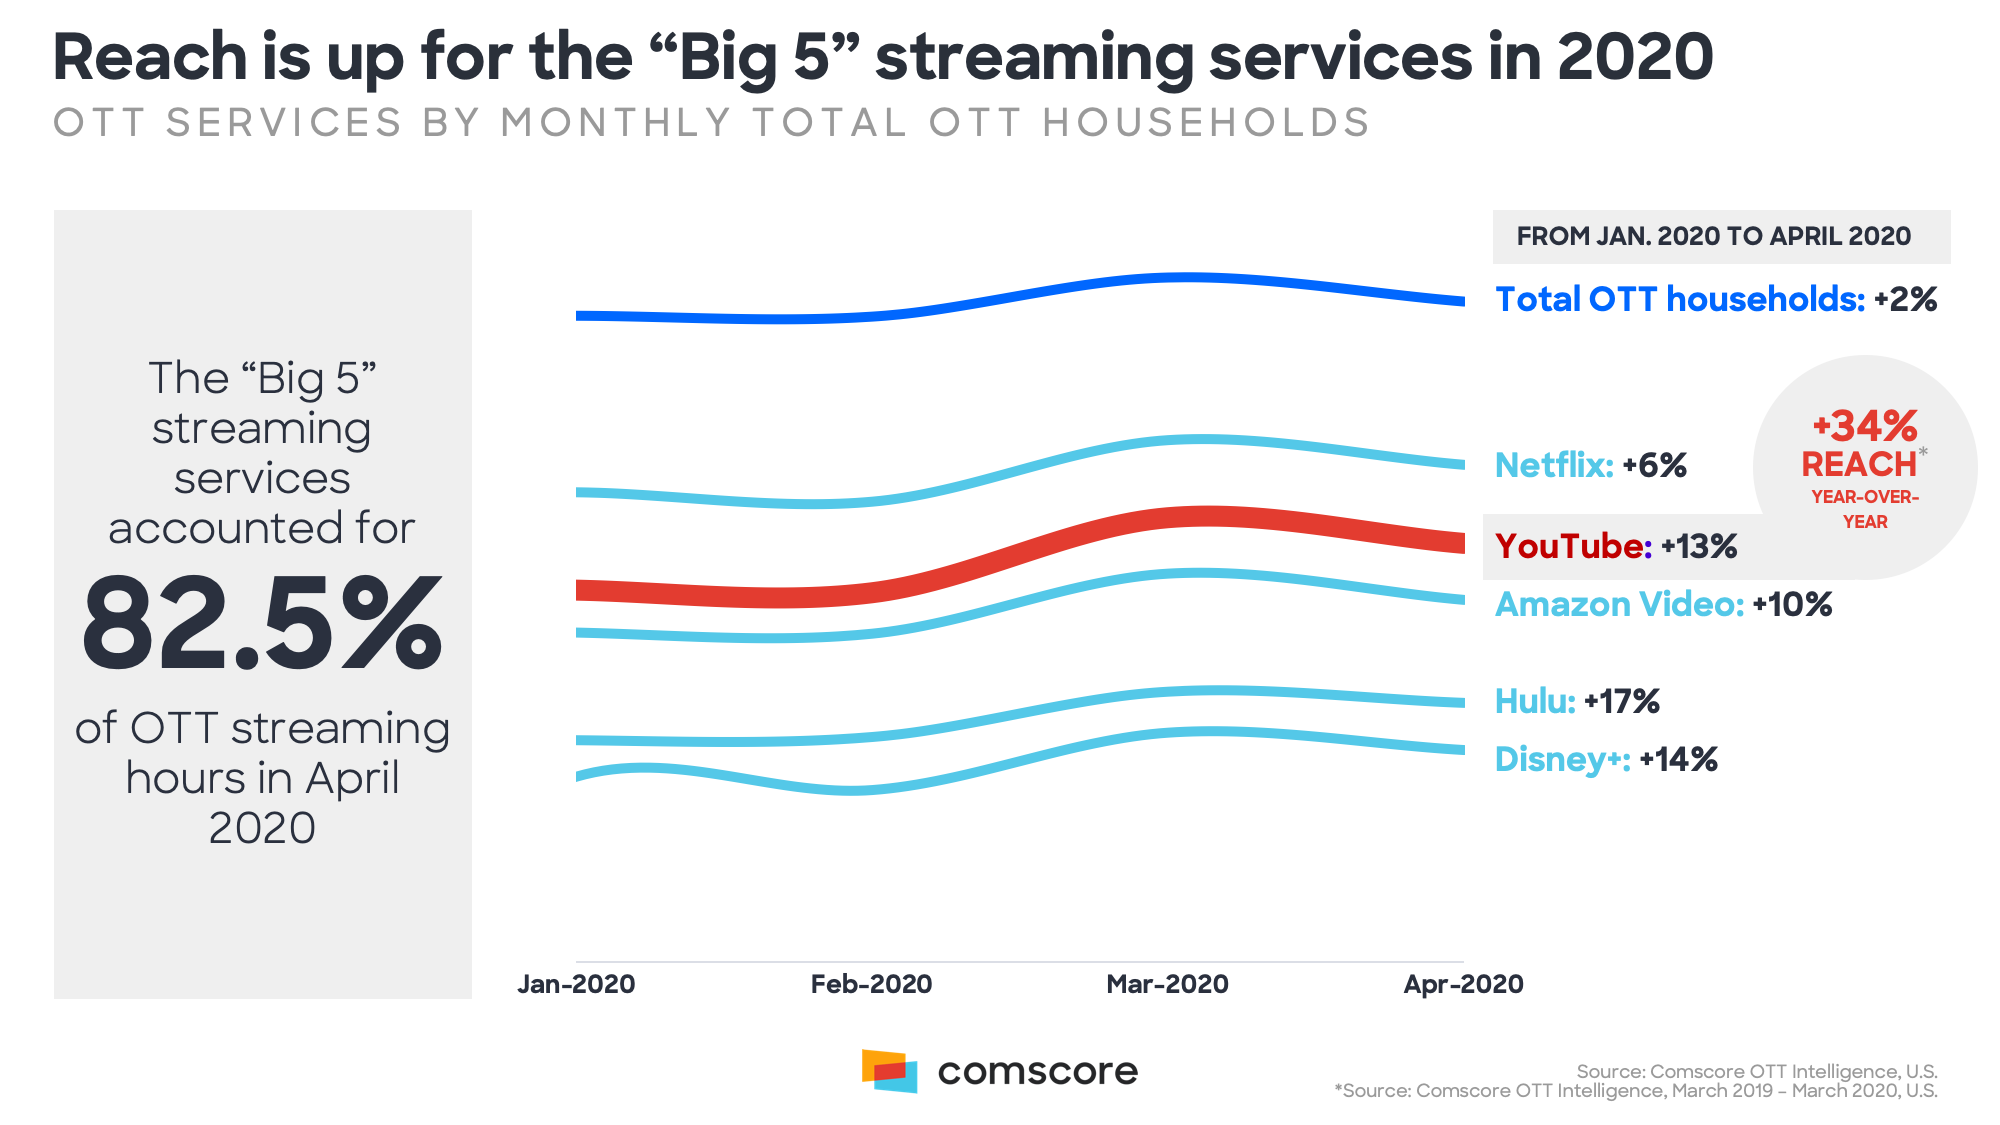 Reach is up for the Big 5 Streaming Services in 2020